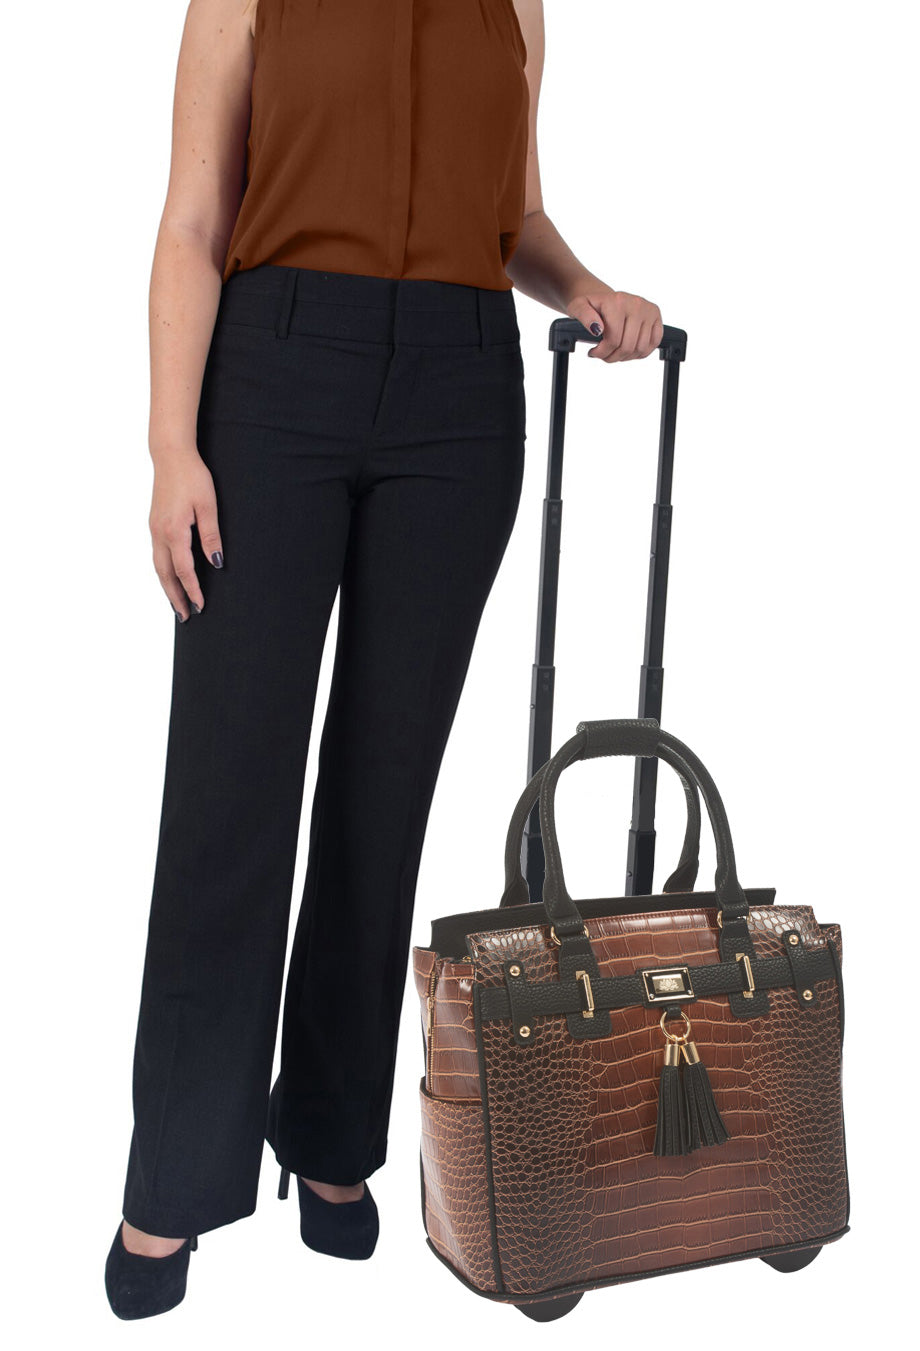 Manhattan Alligator Rolling Laptop Bag - Stylish Briefcase & Tote for Professional Women or Teacher - Fits 13"-17" Laptop